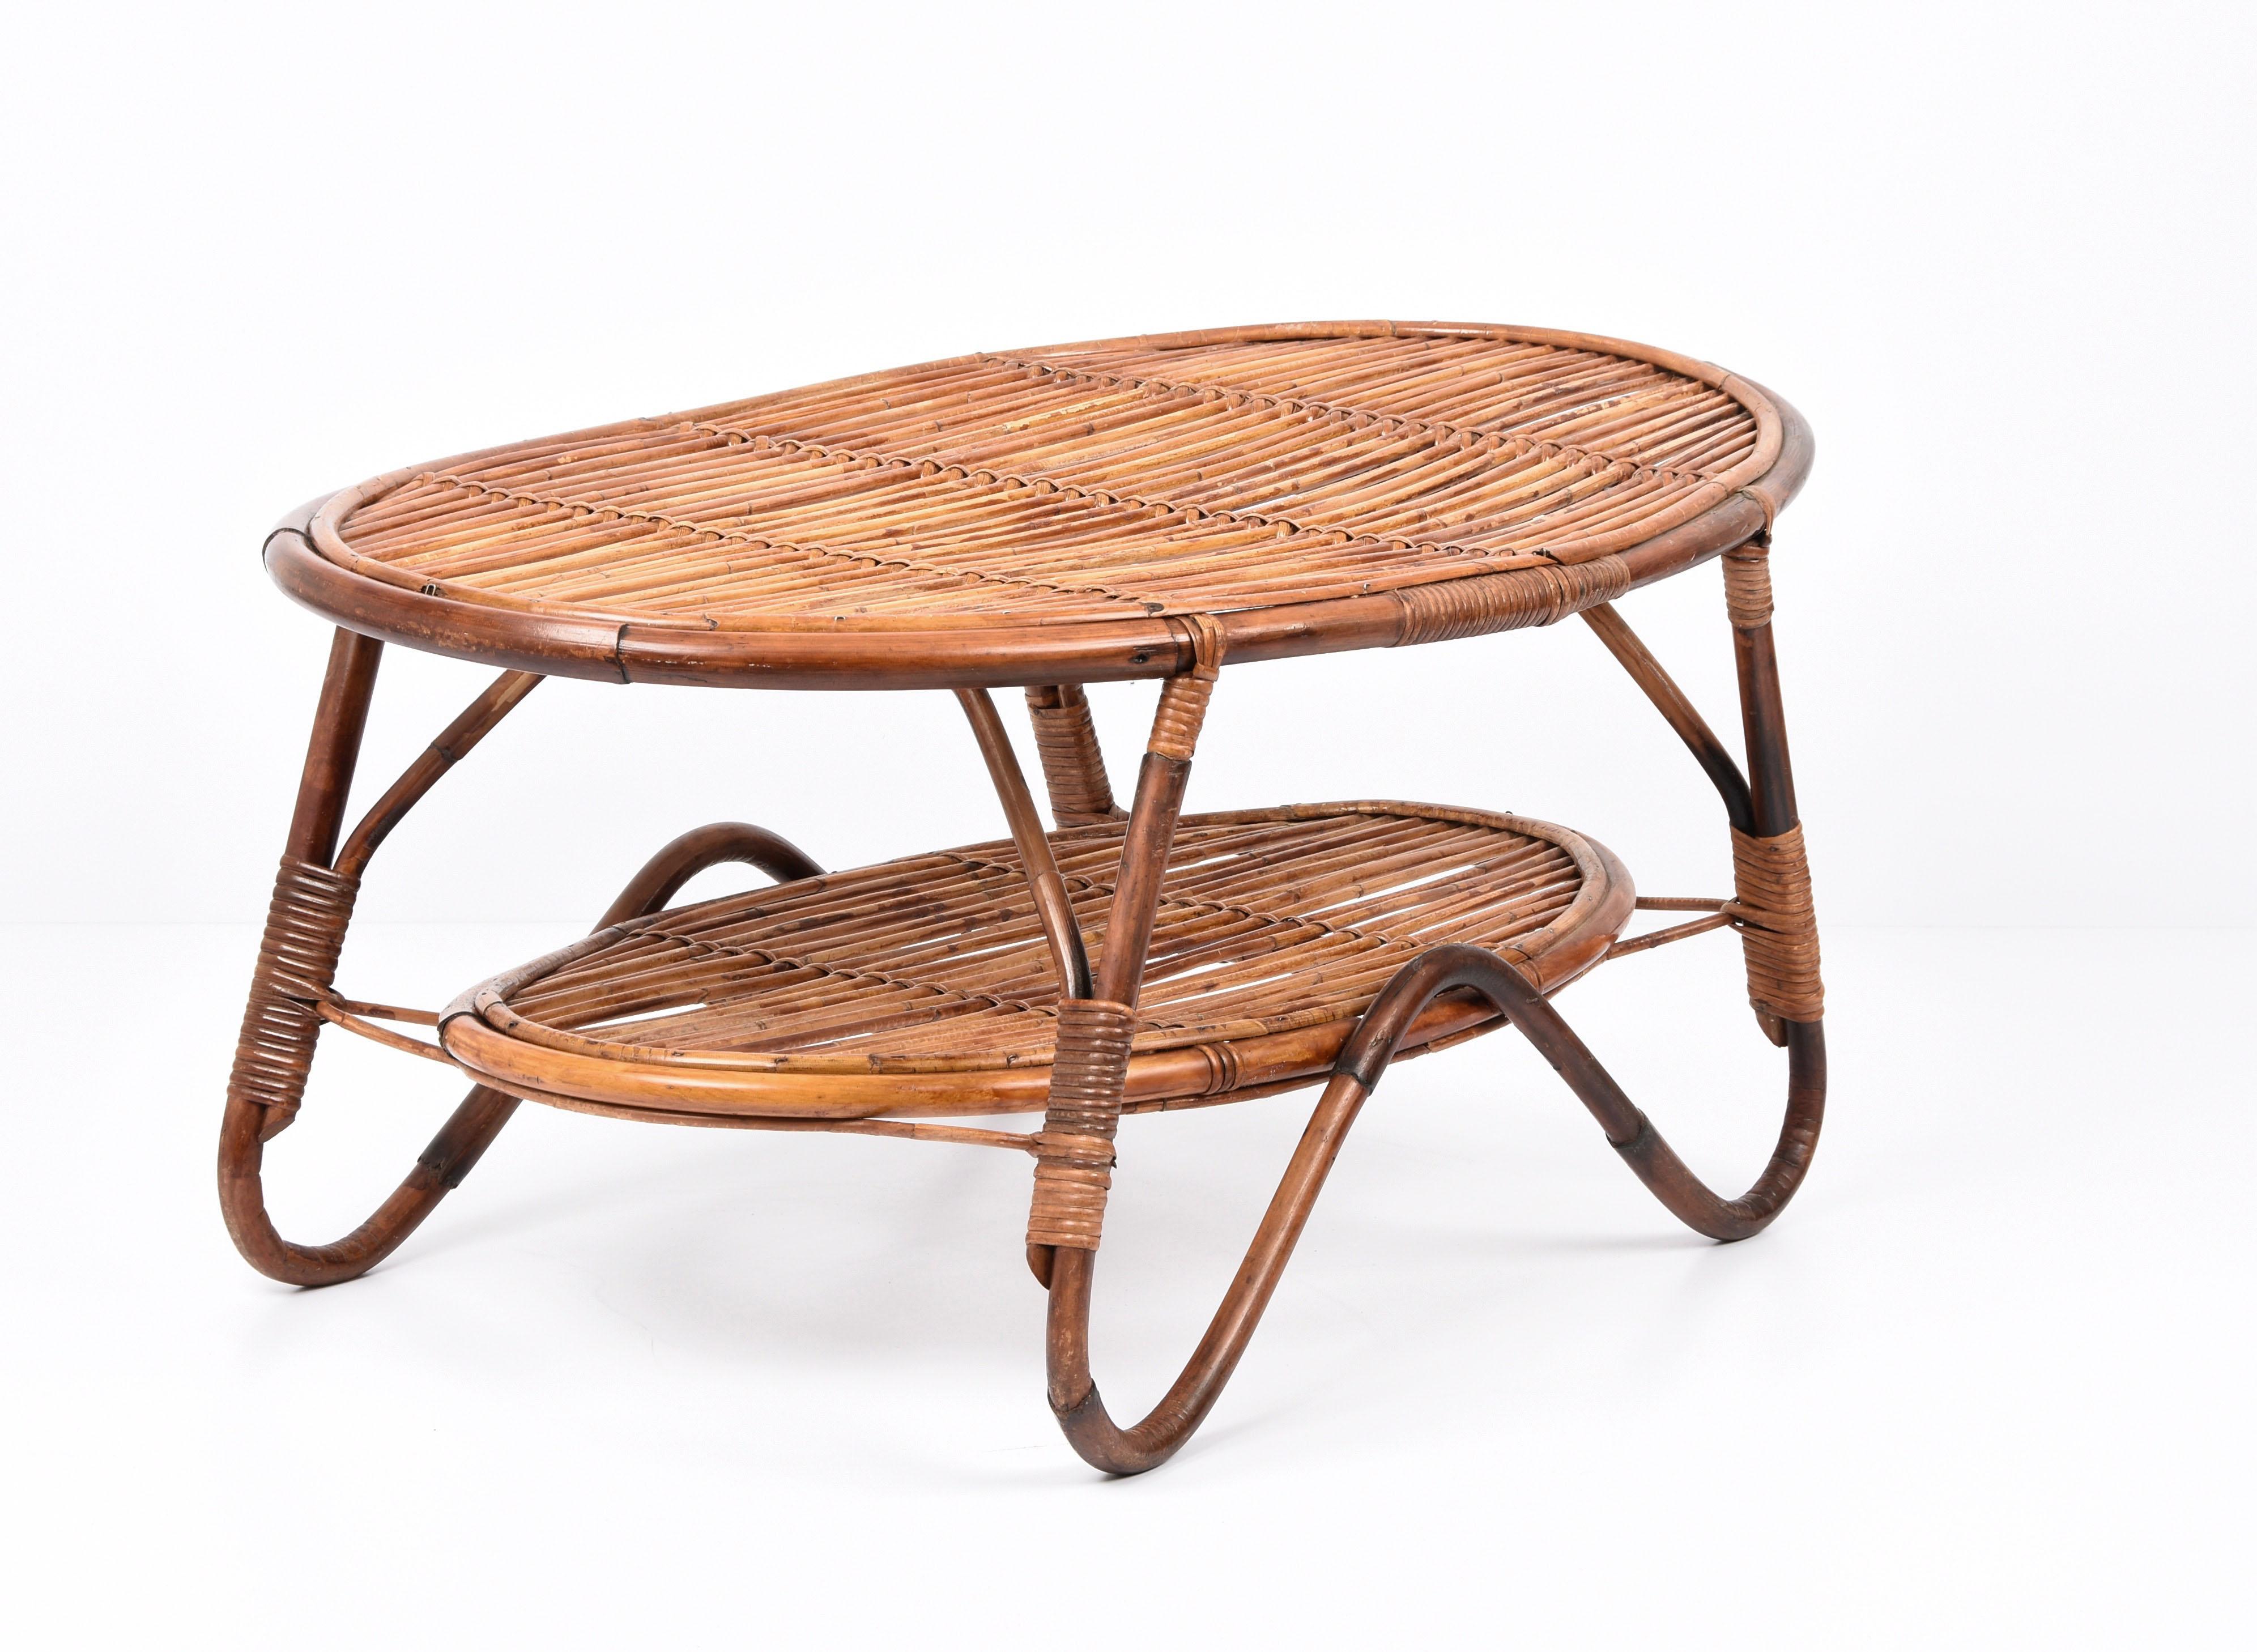 Midcentury Italian Oval Rattan and Bamboo Two Levels Coffee Table, 1950s For Sale 1